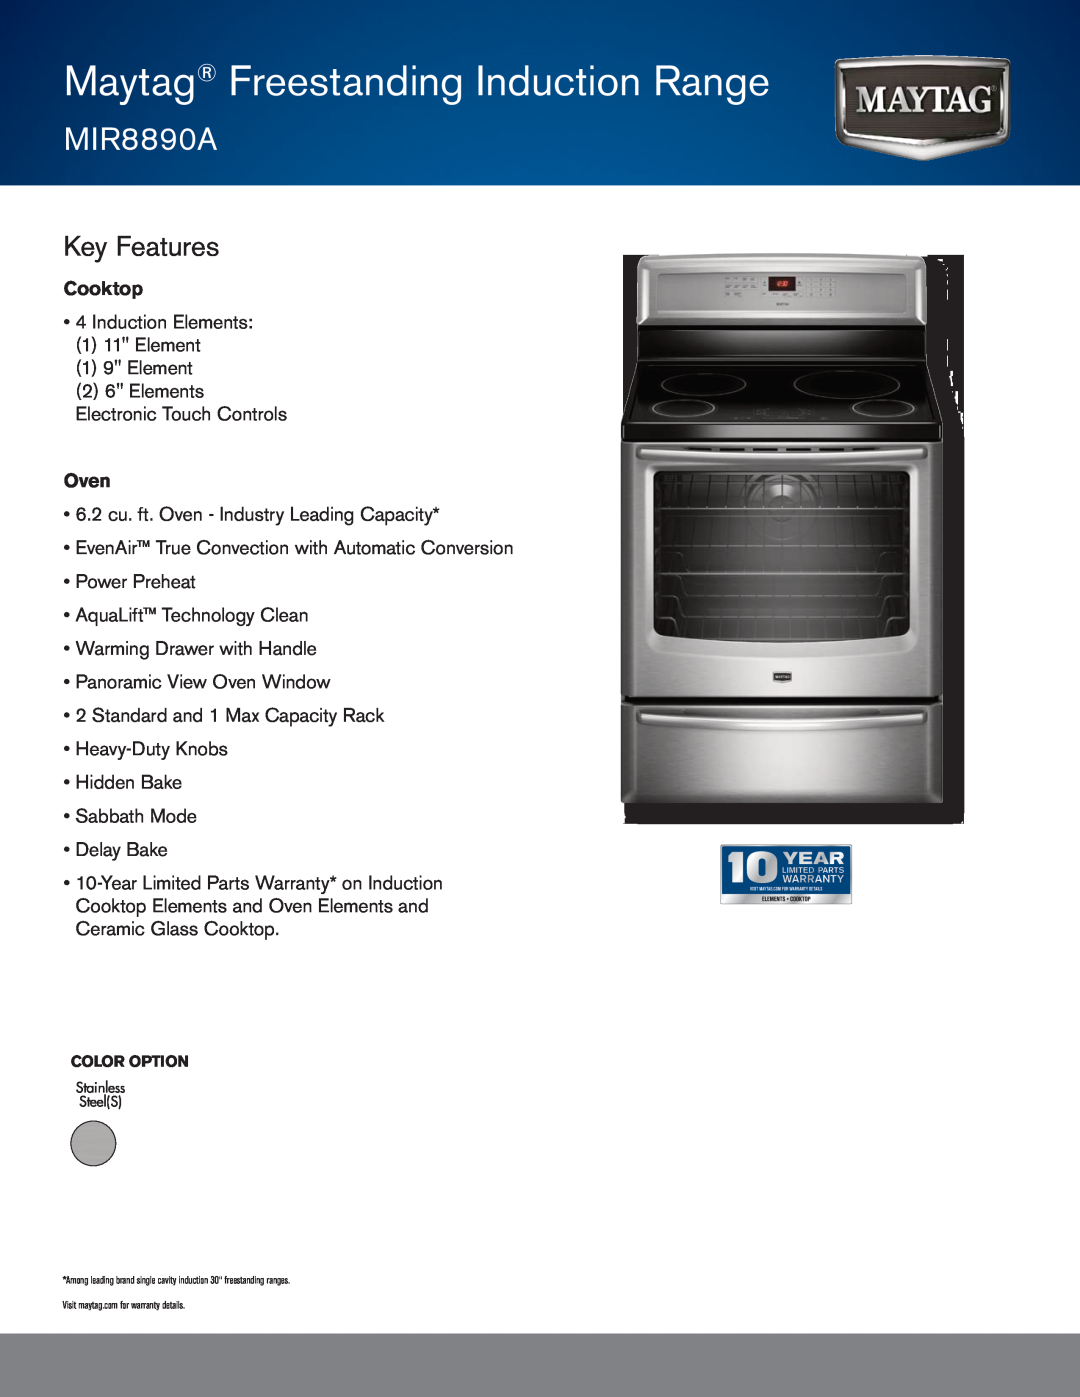 Maytag MIR8890A warranty mir8890a, Key Features, Maytag Freestanding Induction Range, Cooktop, Oven 